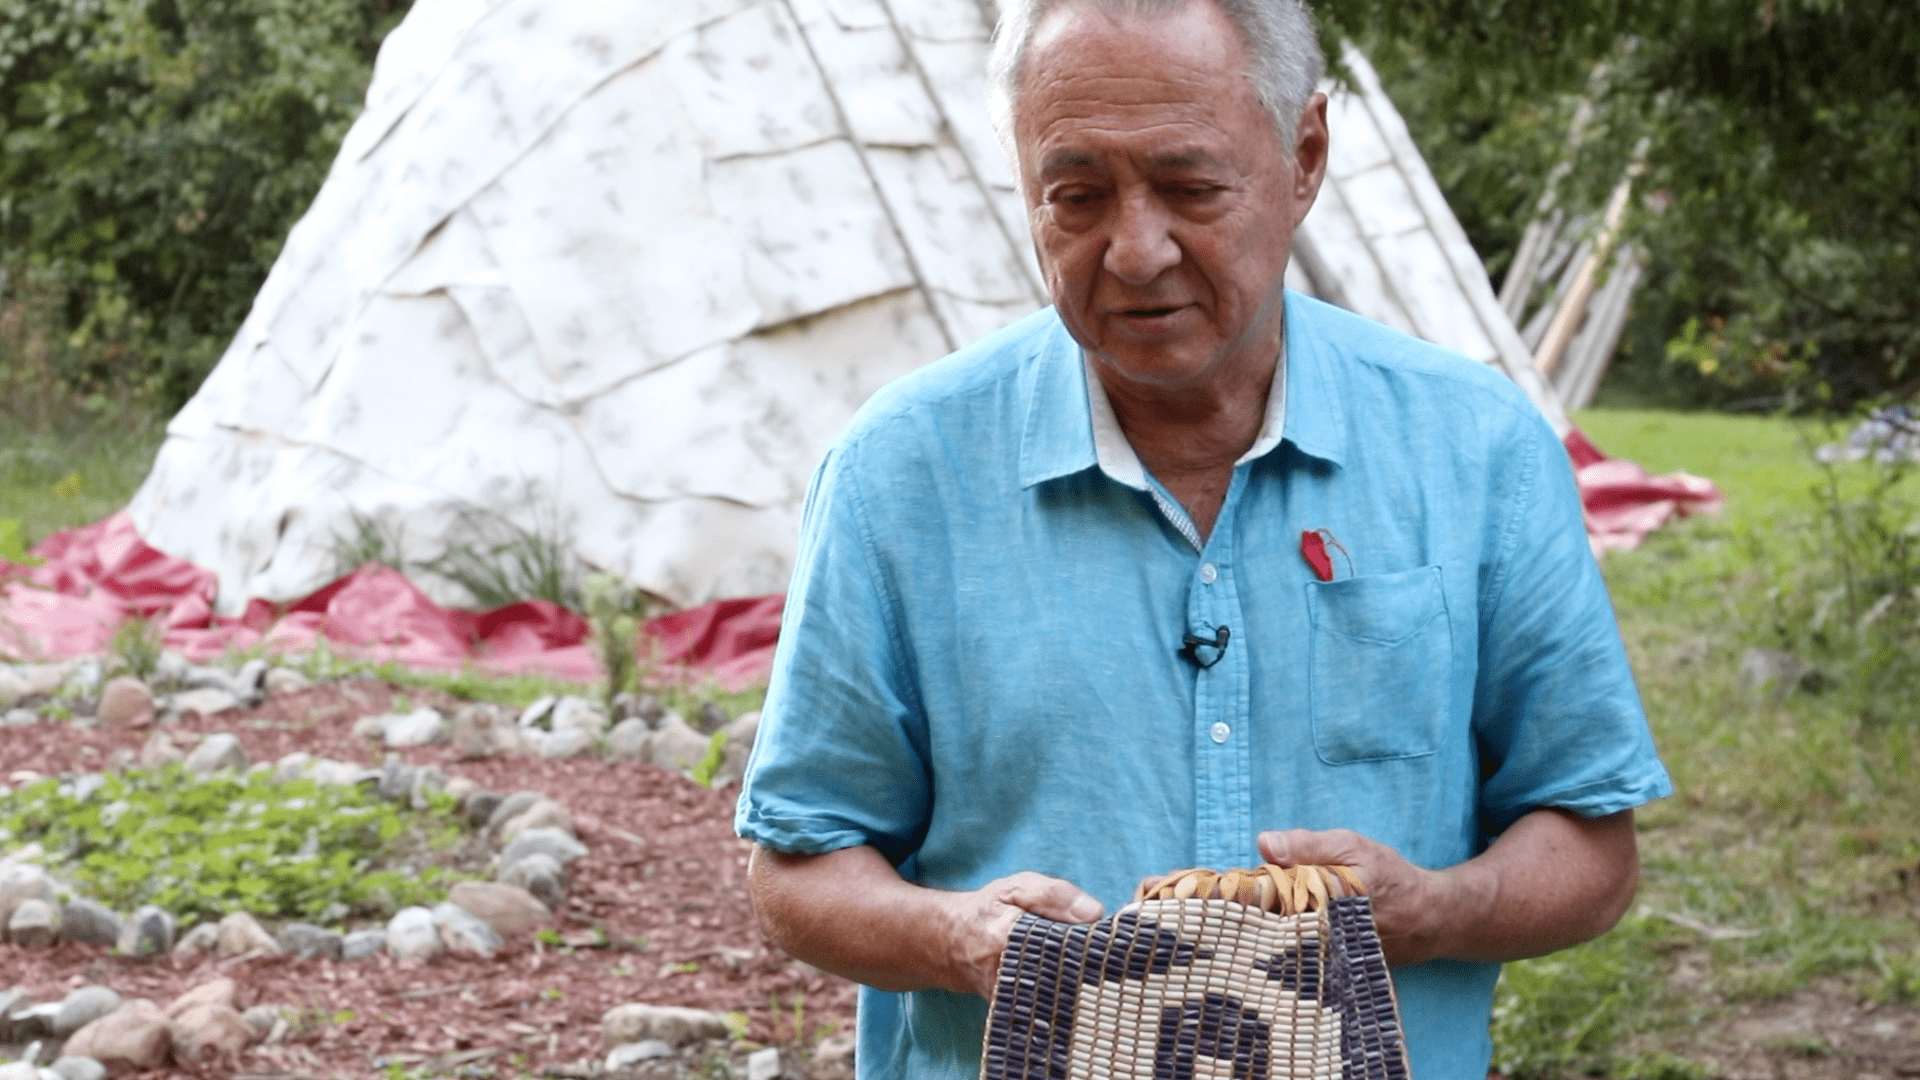 Maurice Switzer holding a wampum belt telling a story about it